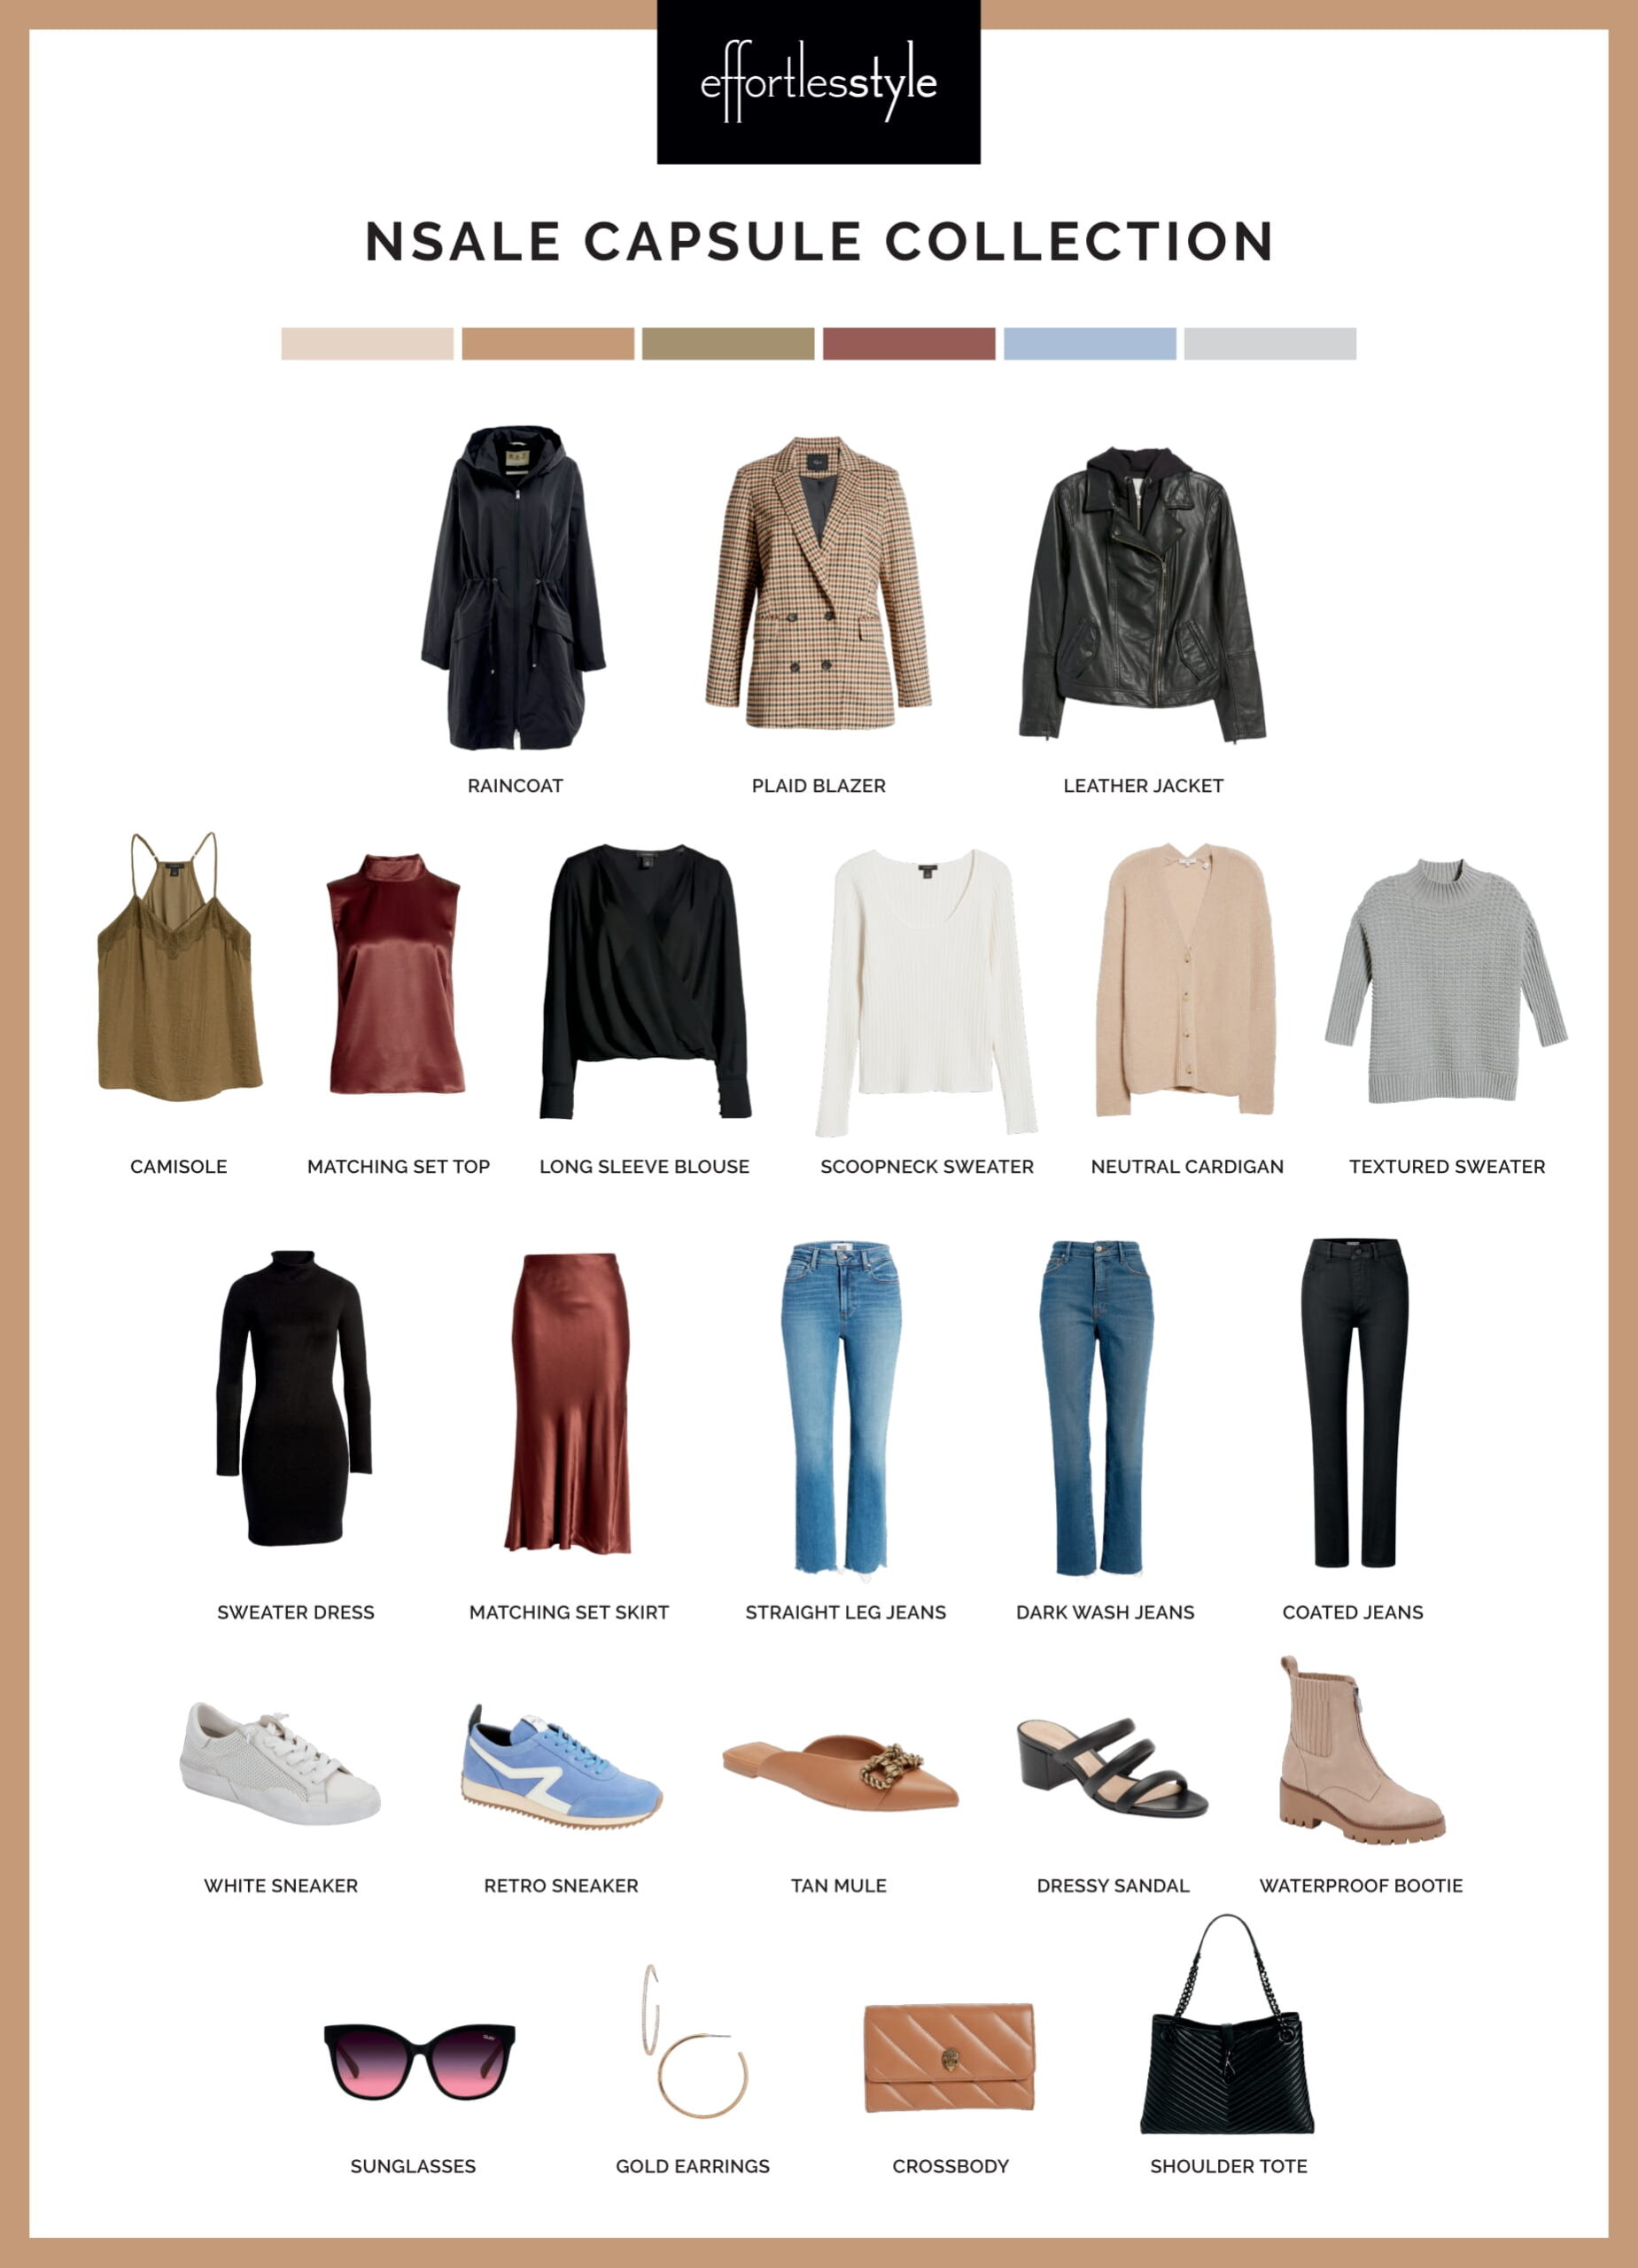 Sale Capsule Collection Nordstrom Anniversary Sale early fall capsule wardrobe what to buy from the Nordstrom Sale for fall